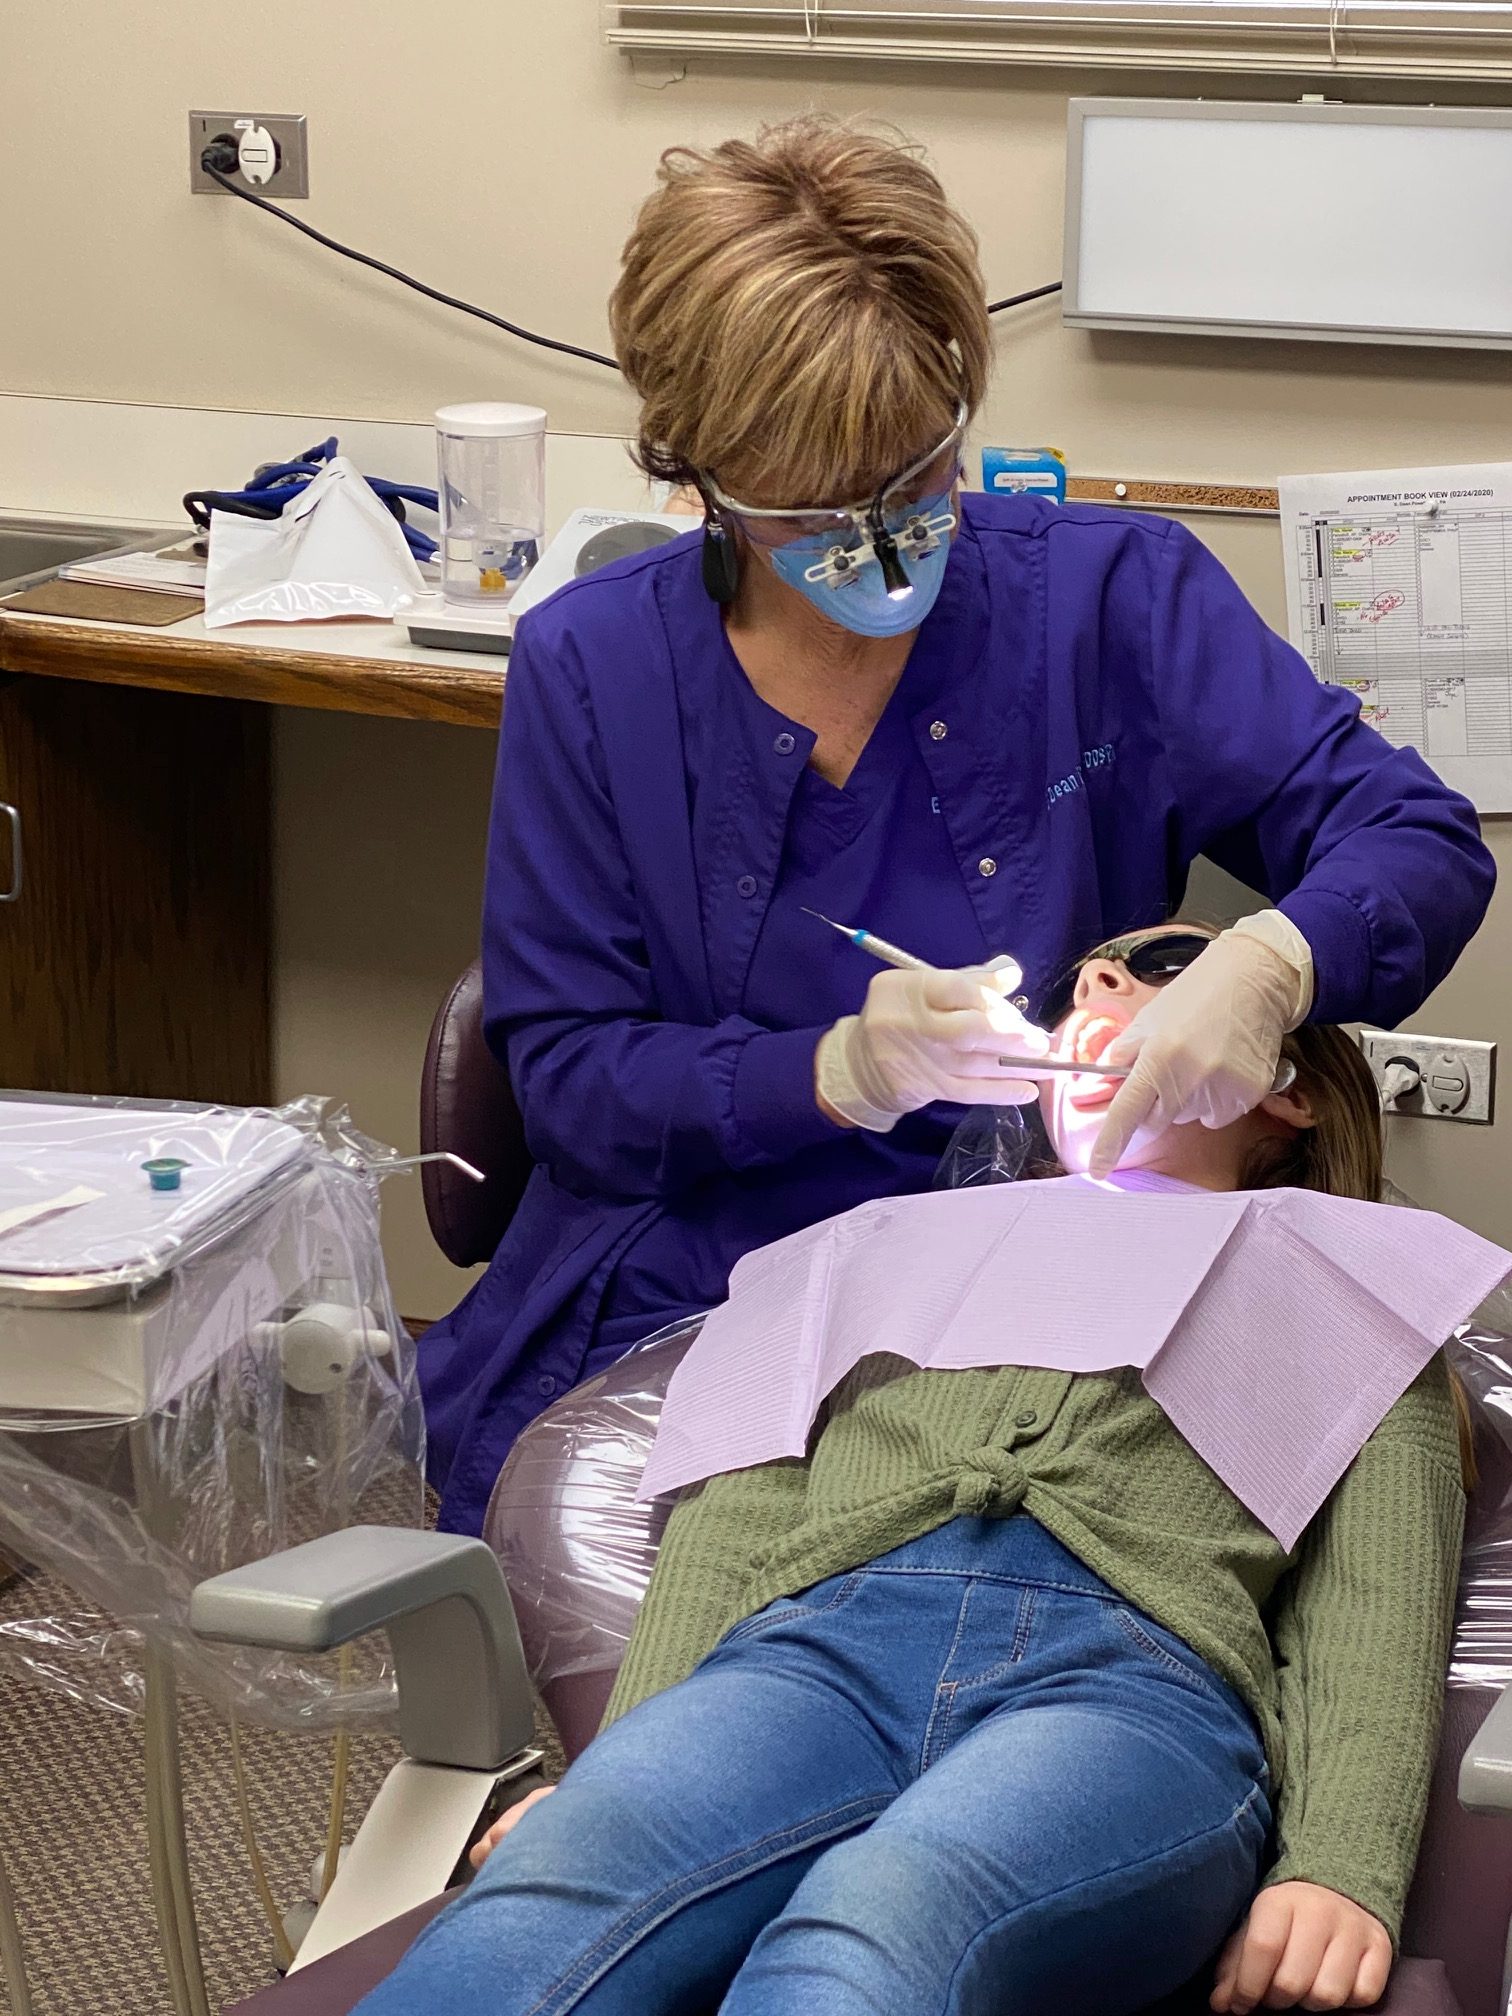 Susan McLain, Senior Hygienist, is cleaning a patient's teeth and wearing protective glasses, face mask, and gloves.